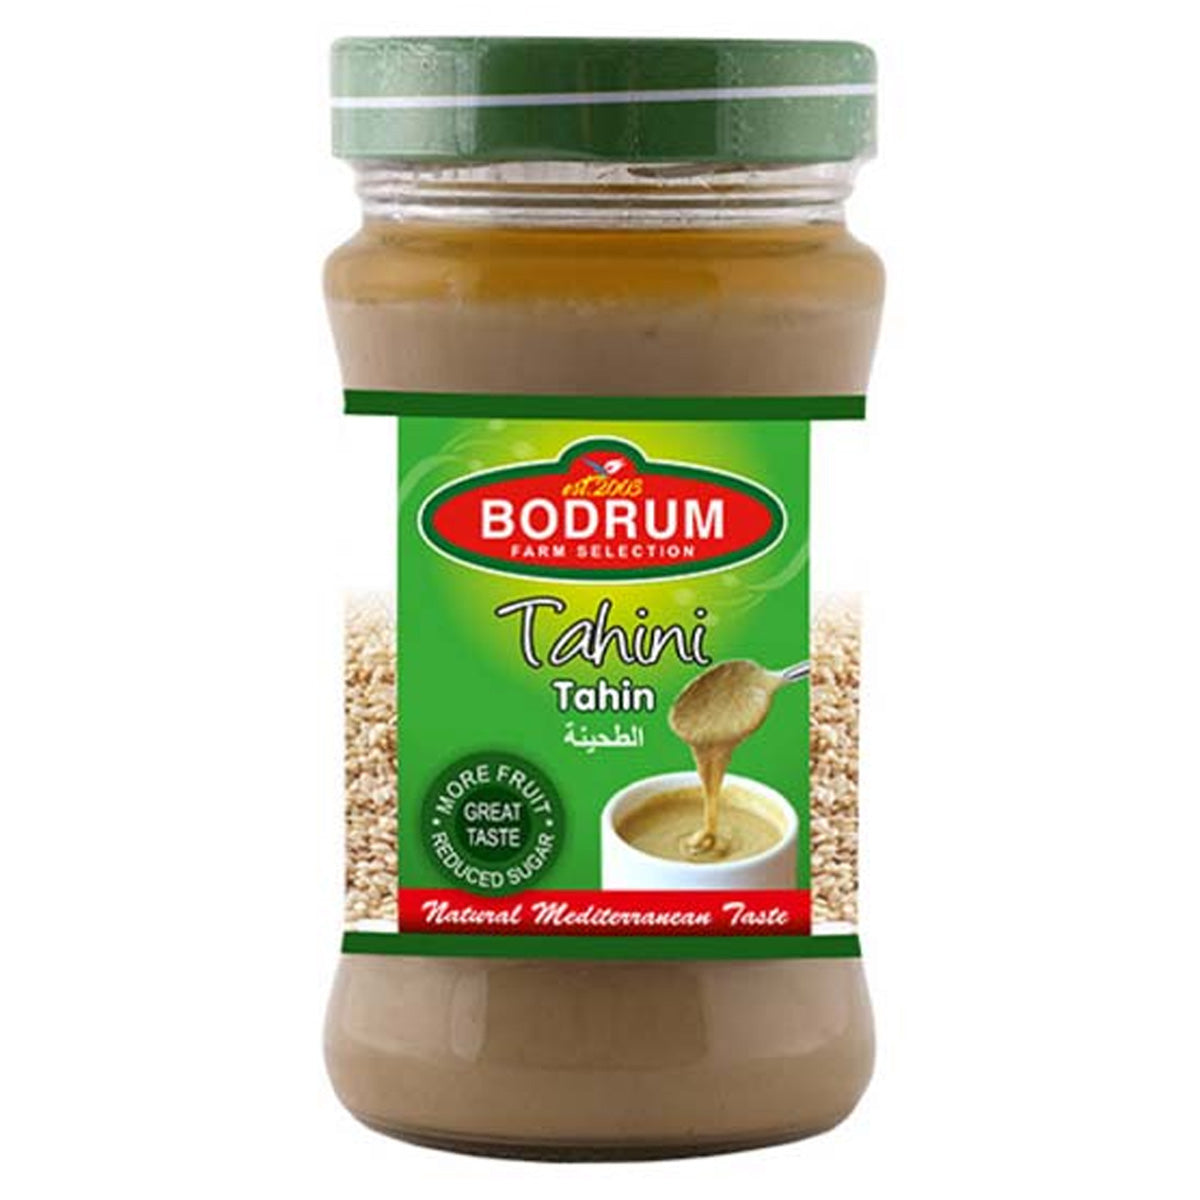 A jar of Bodrum - Tahini Sesame Seed Paste - 300g by Bodrum on a white background.